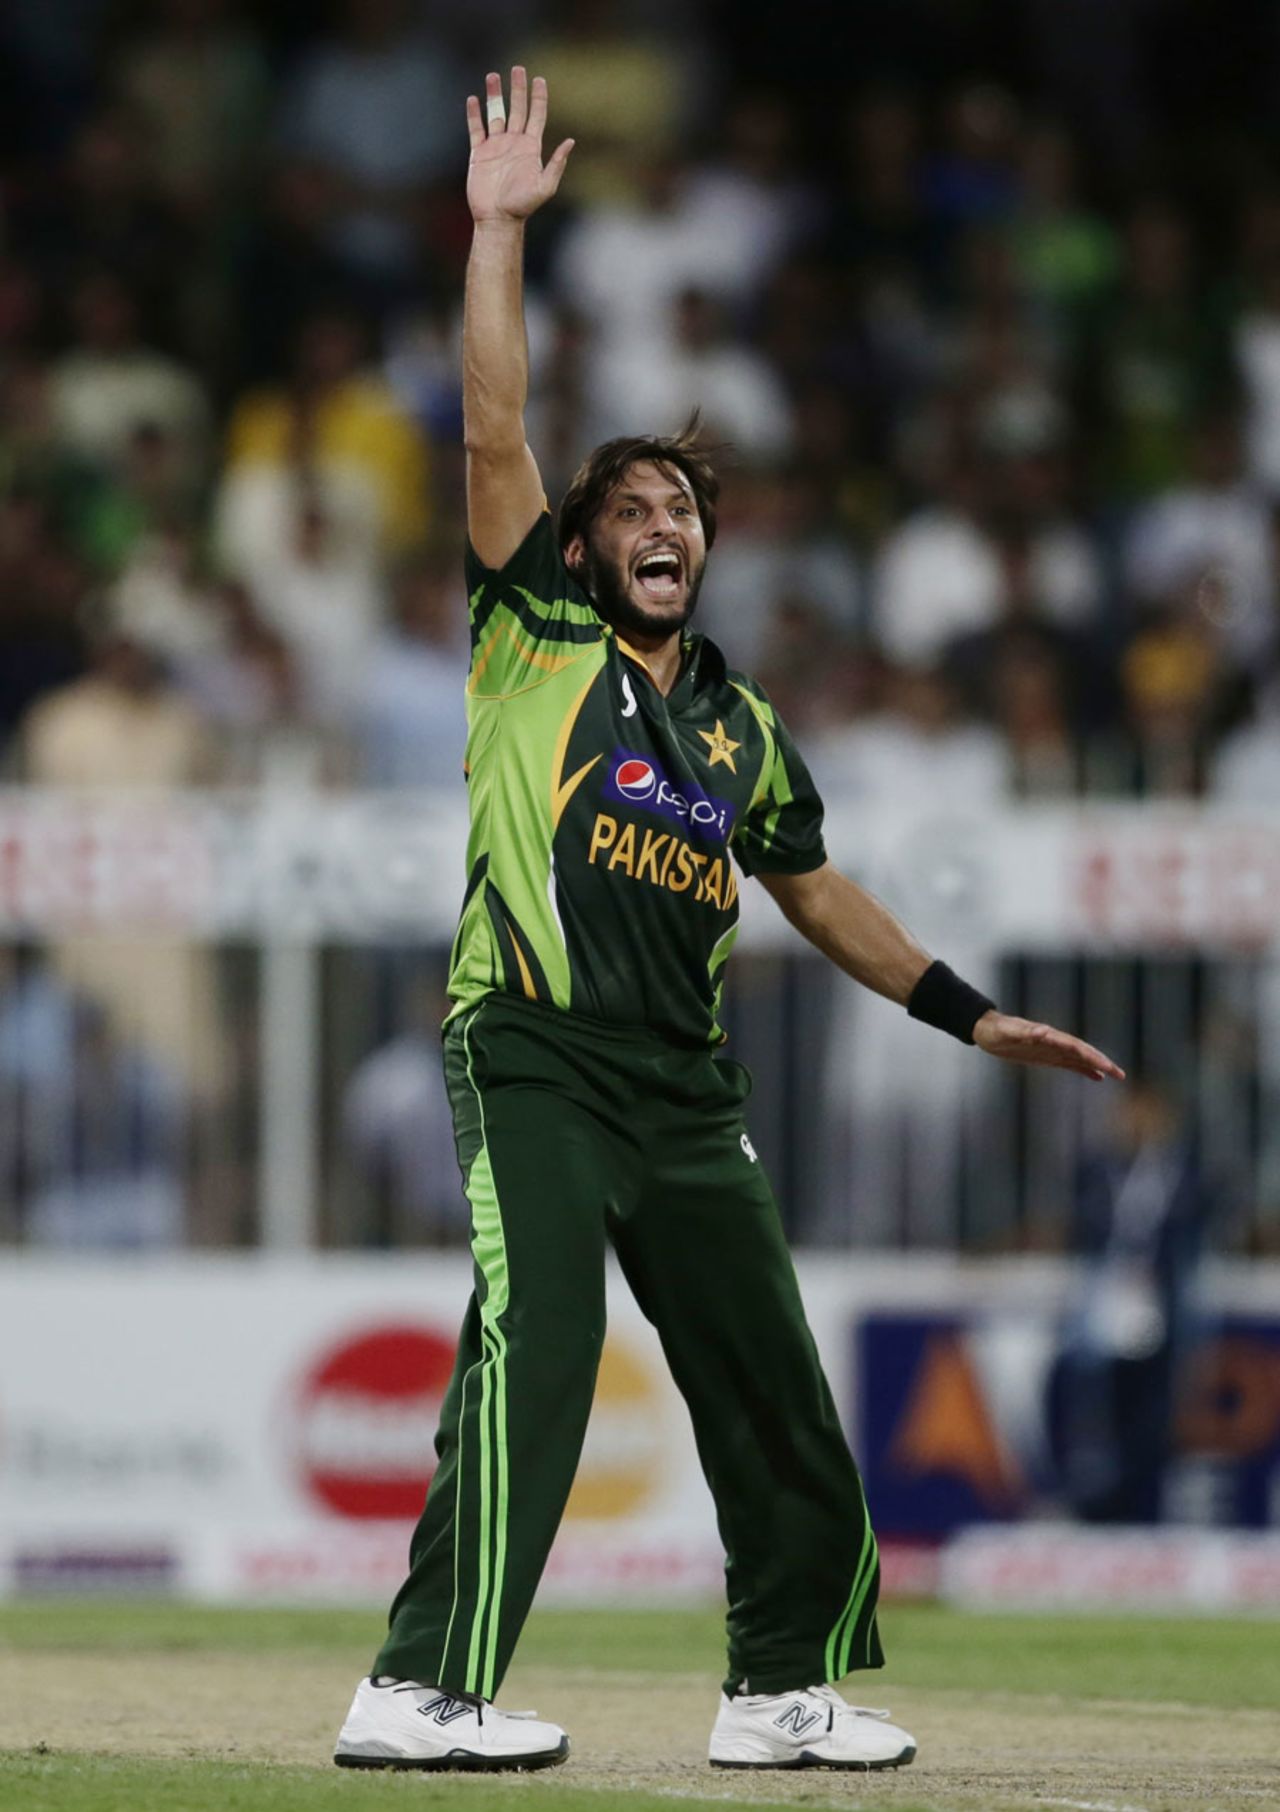 Shahid Afridi finished with 3 for 37, Pakistan v South Africa, 1st ODI, Sharjah, October 30, 2013